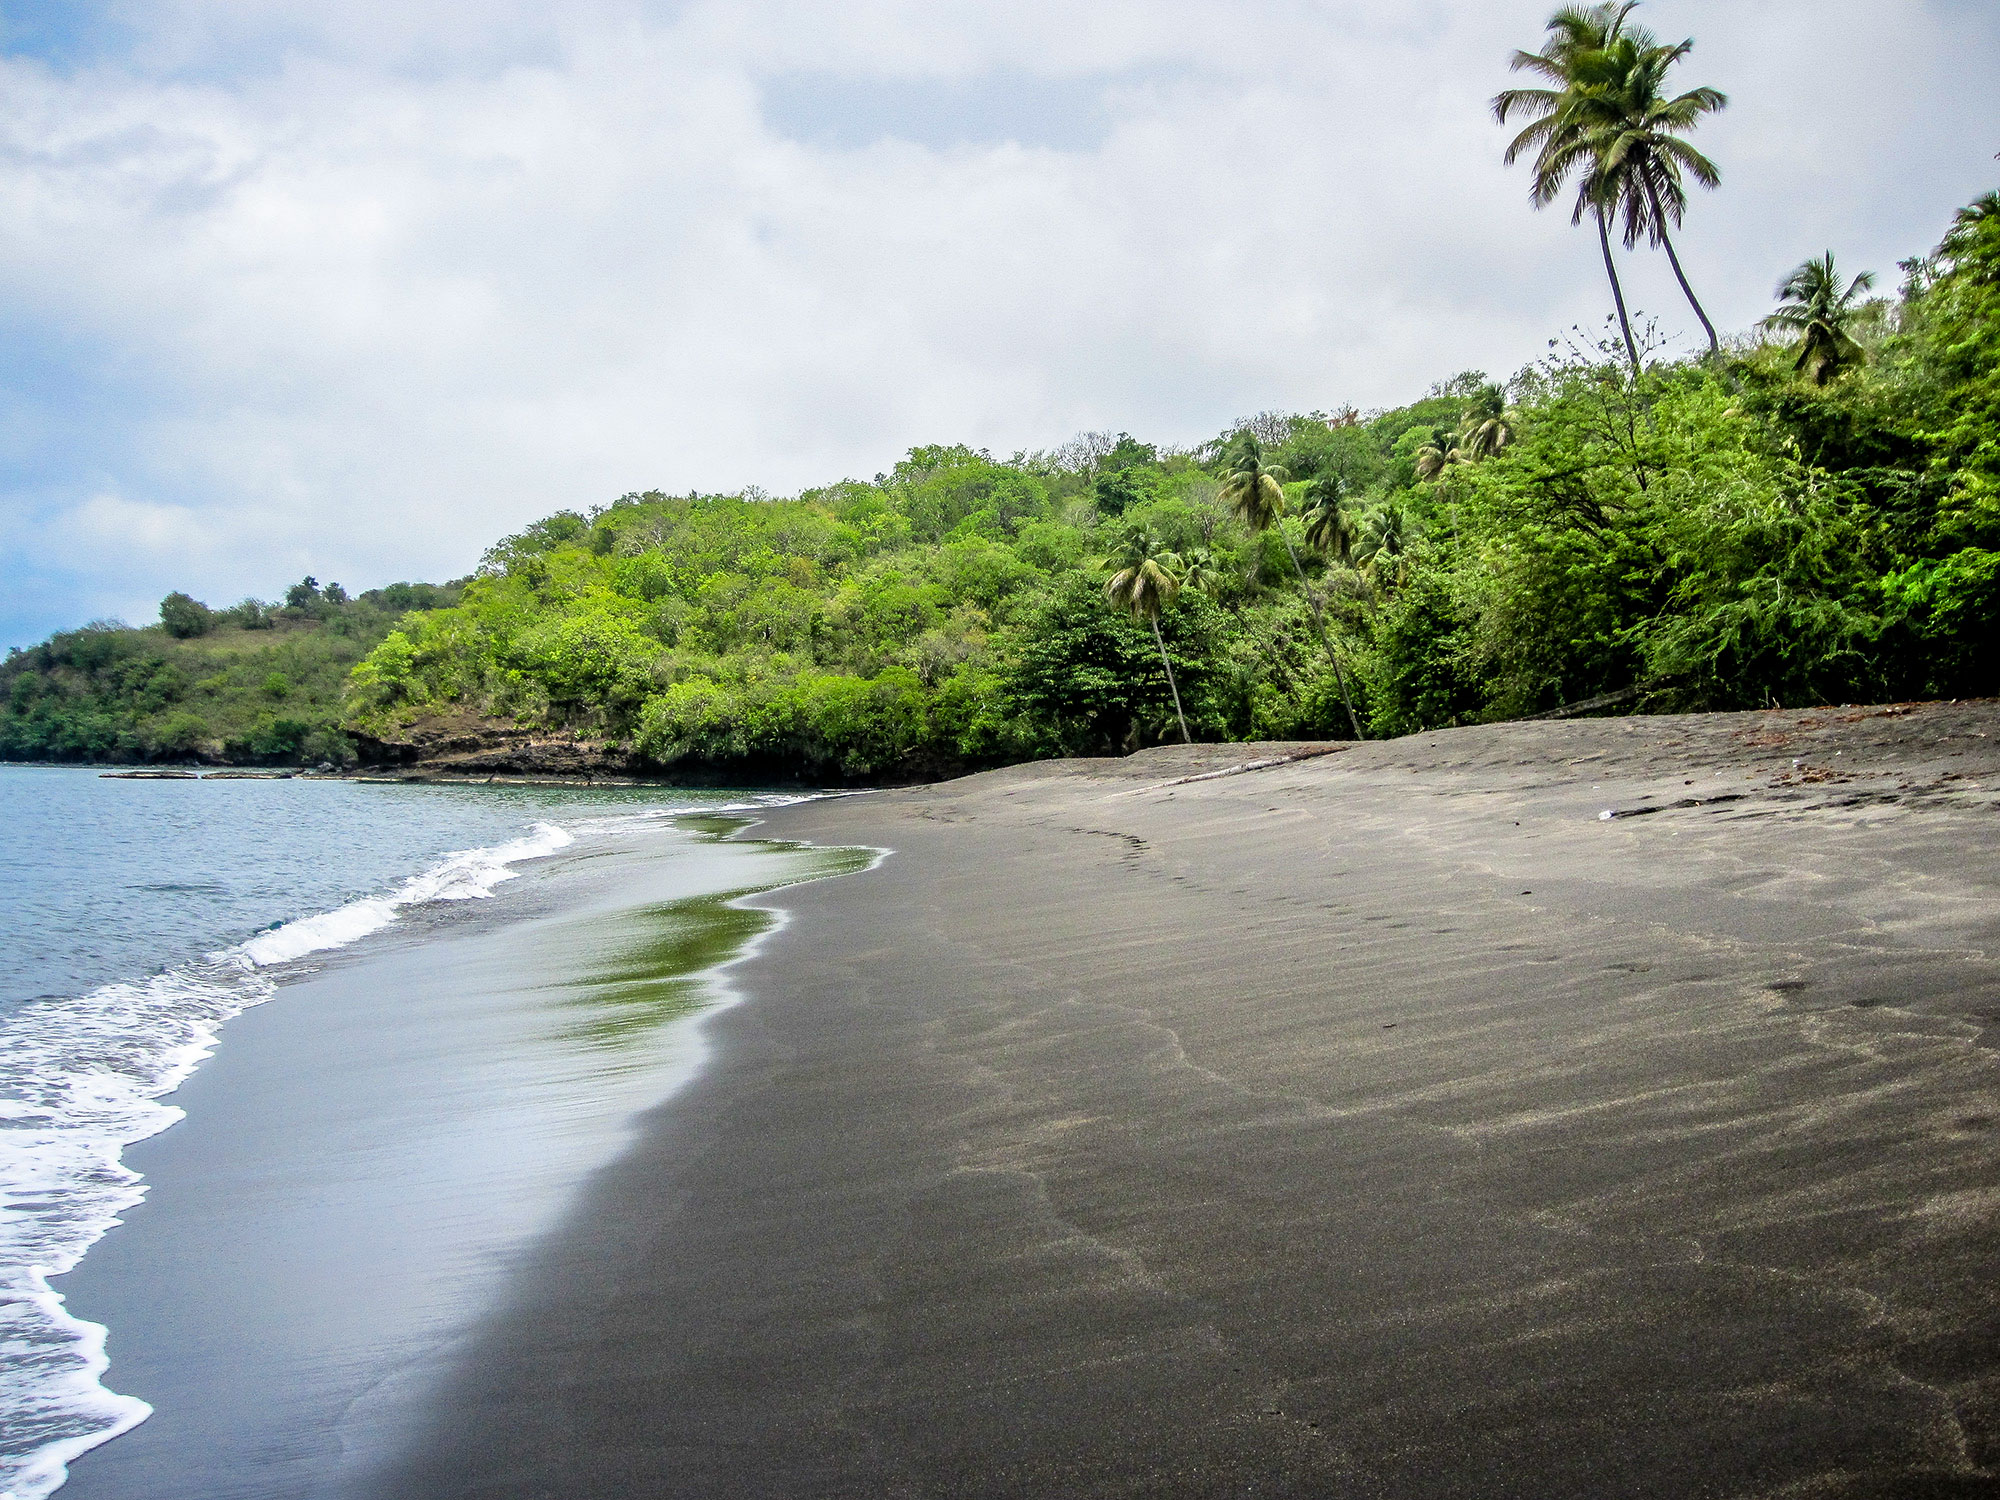 Black sand beach with jungle behind in St Vincent, The Caribbean